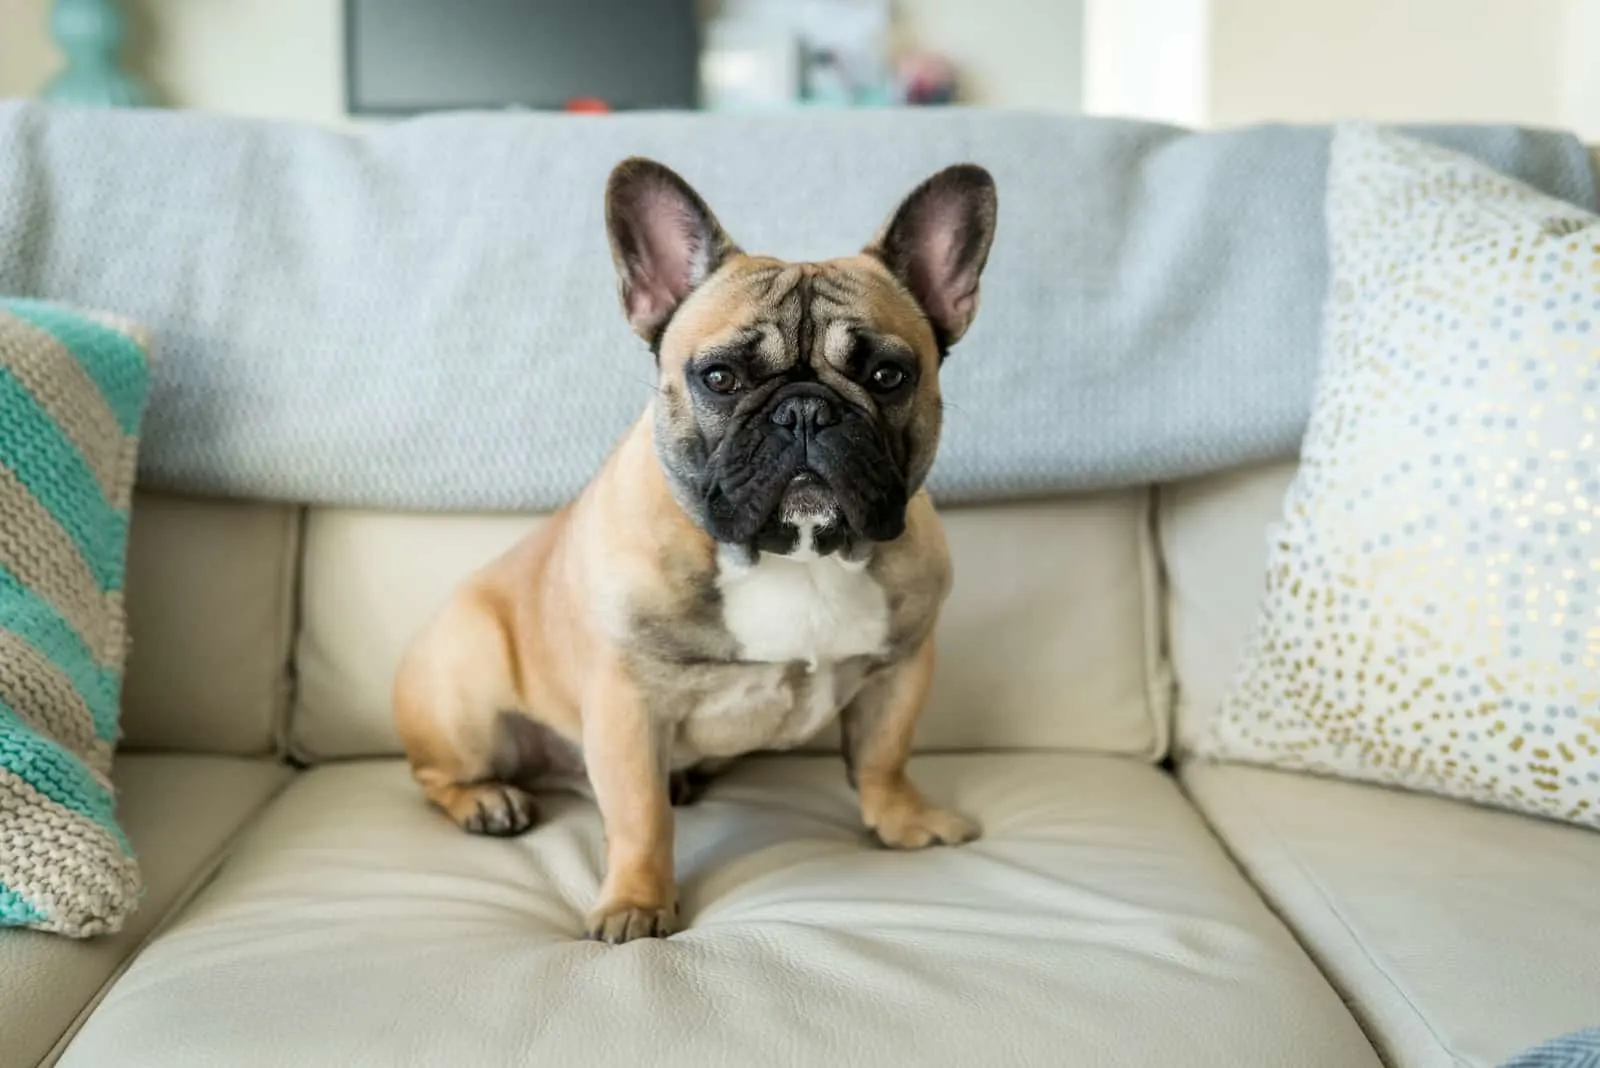 French bulldog sitting on couch